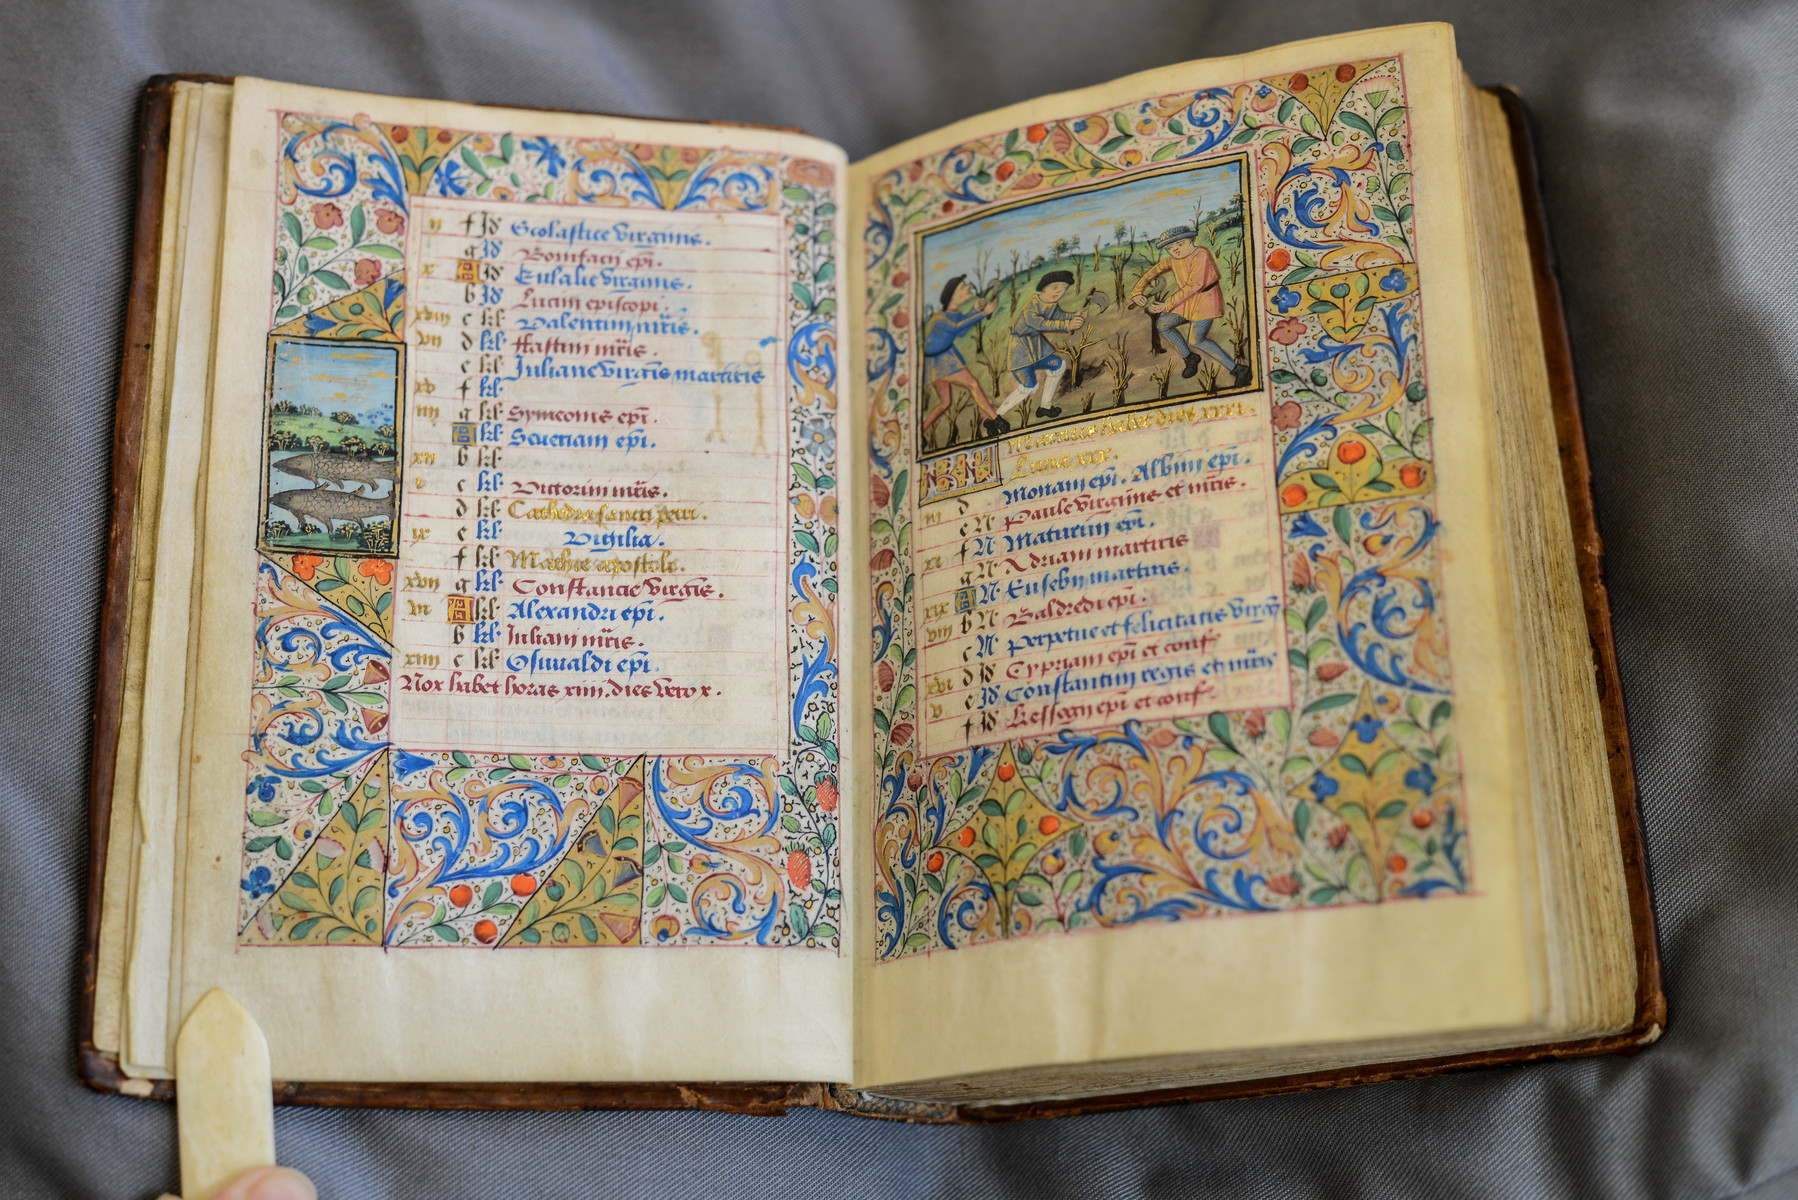 The Book of Hours.